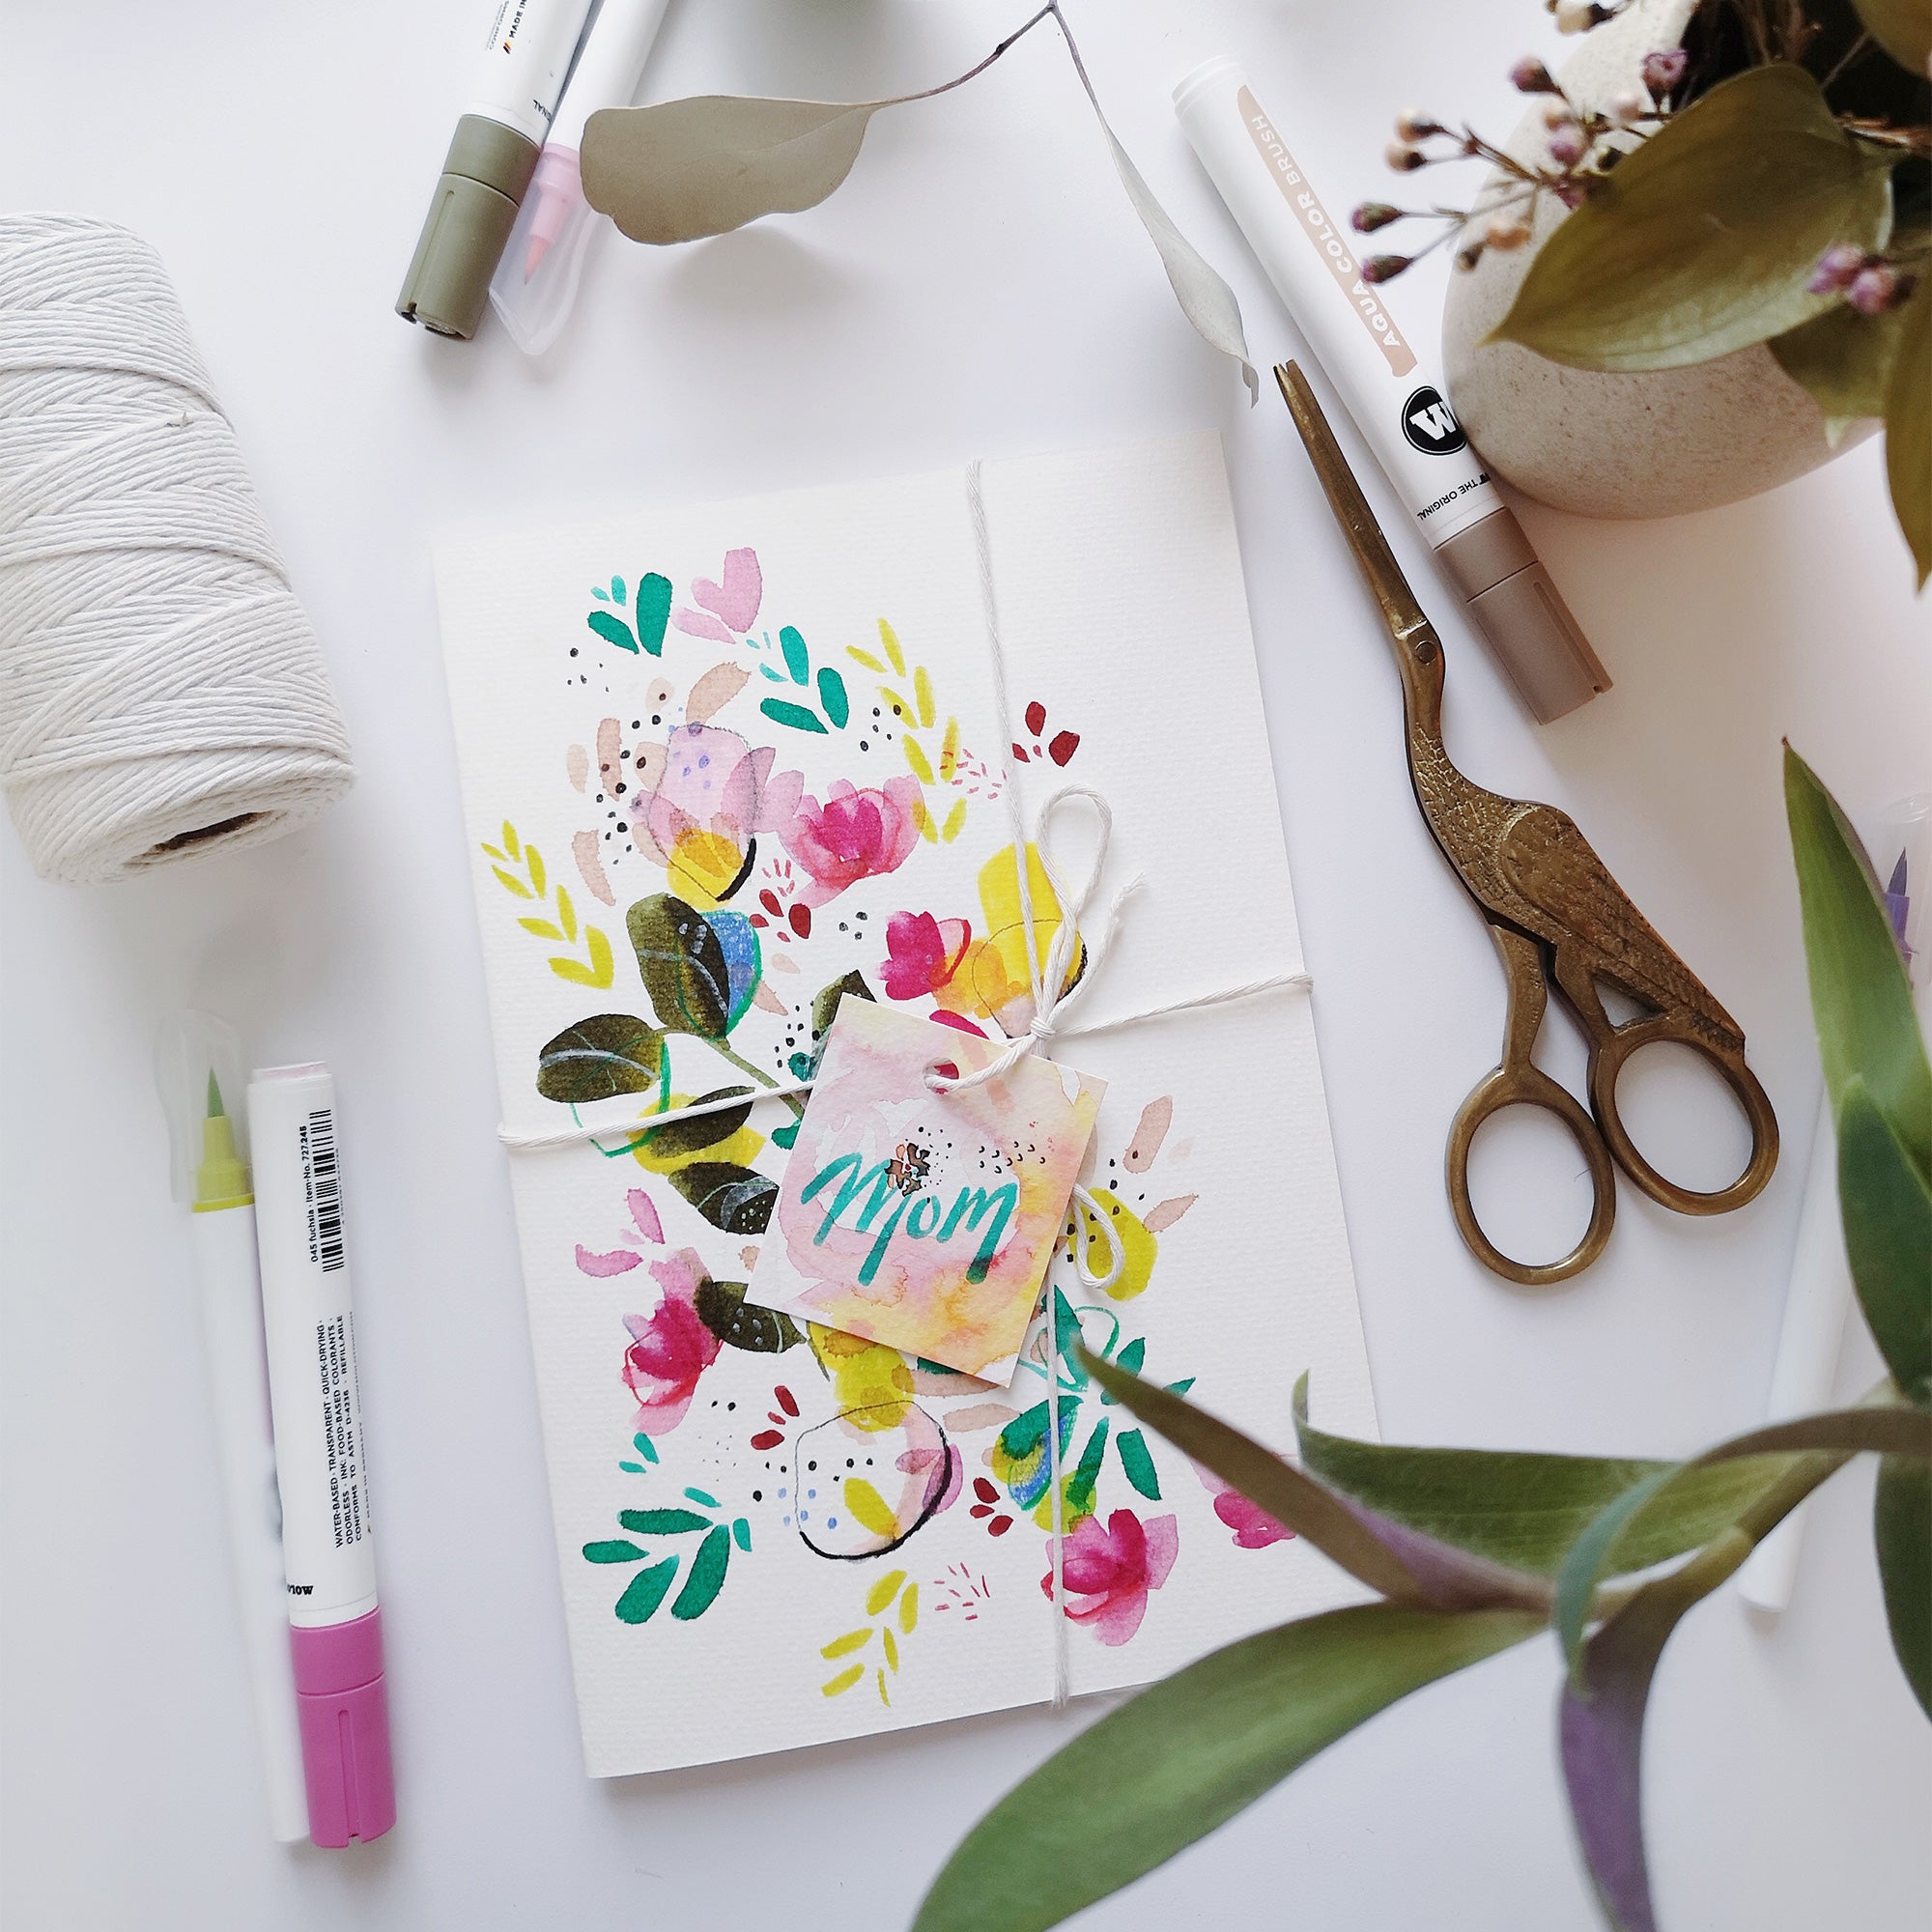 How to make a watercolour greeting card without a paintbrush